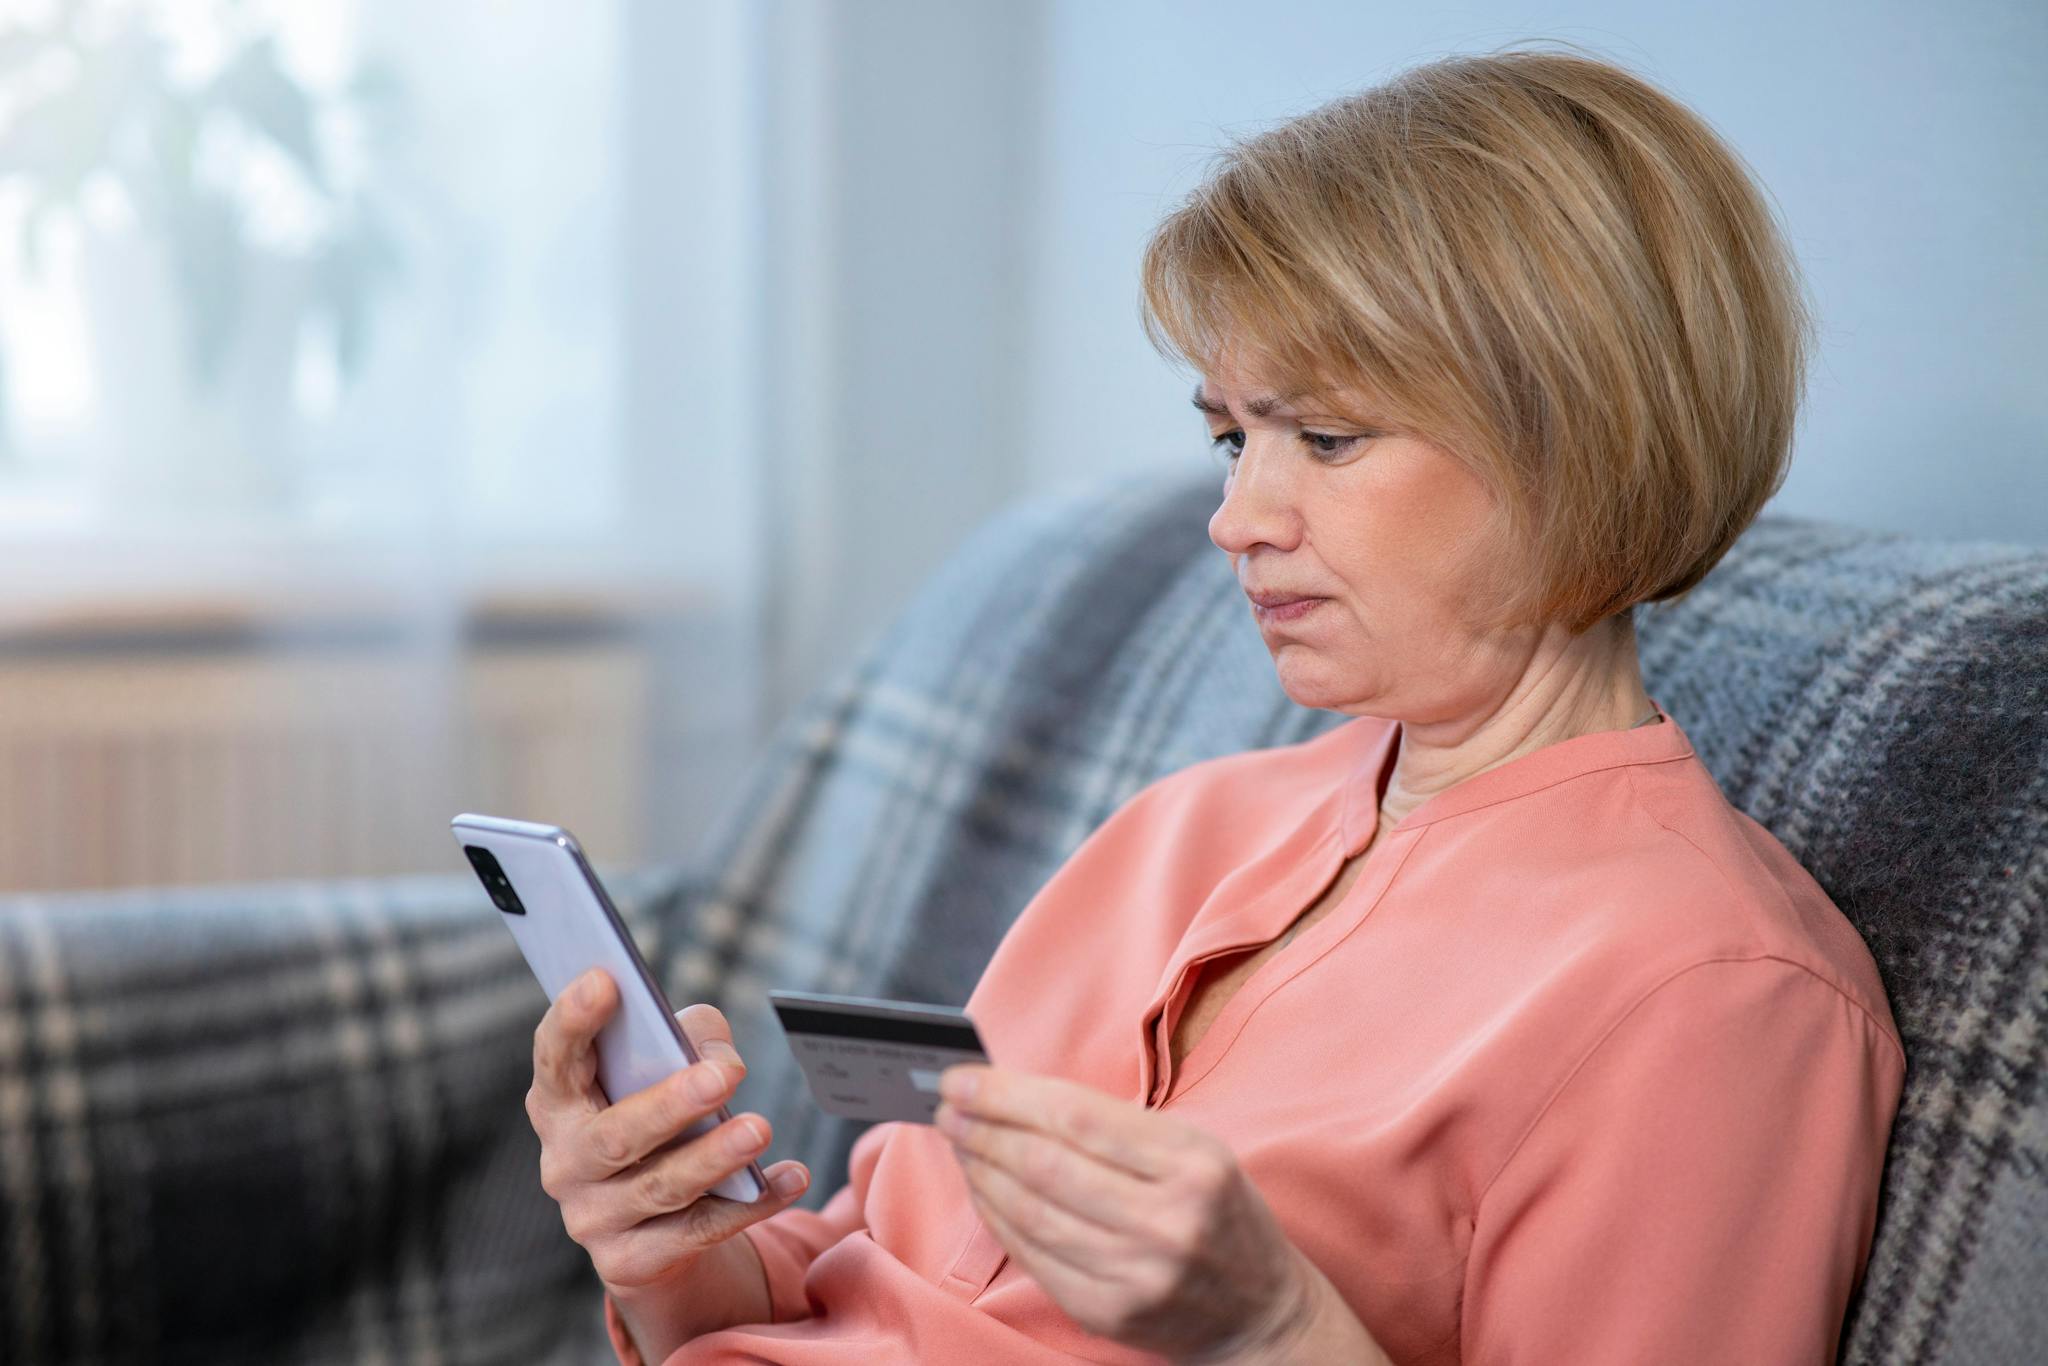 Women sitting on sofa adding her bank card details on her phone